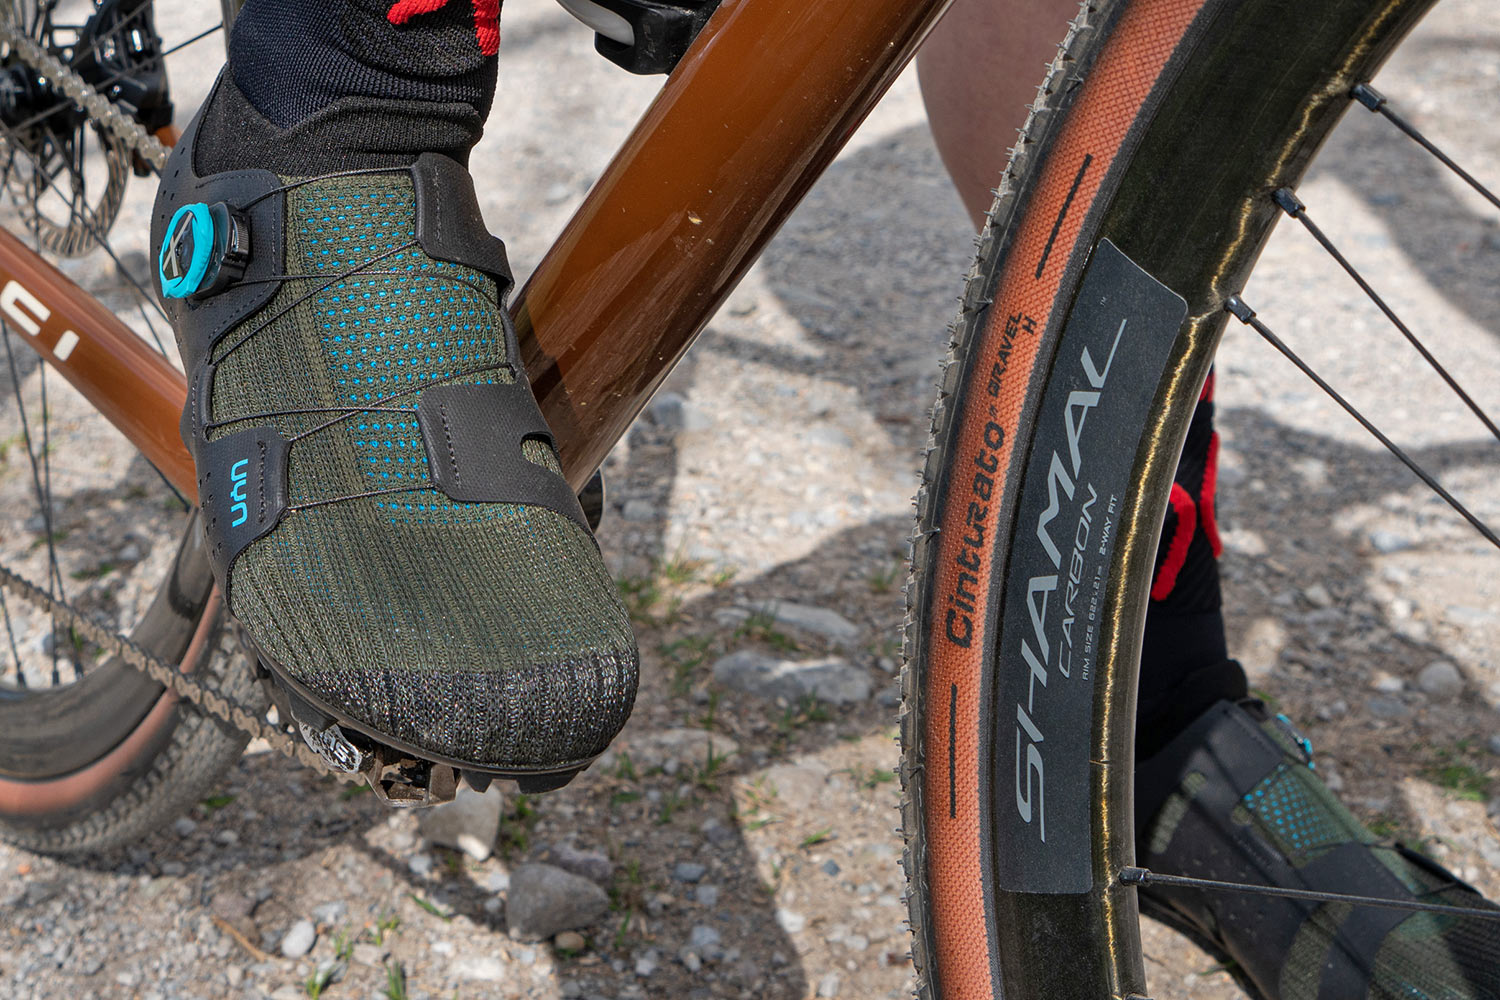 UYN Naked MTB shoes, natural fiber recycled sock-like breathable knit off-road cycling shoe, photo by Mattia Ragni, toe